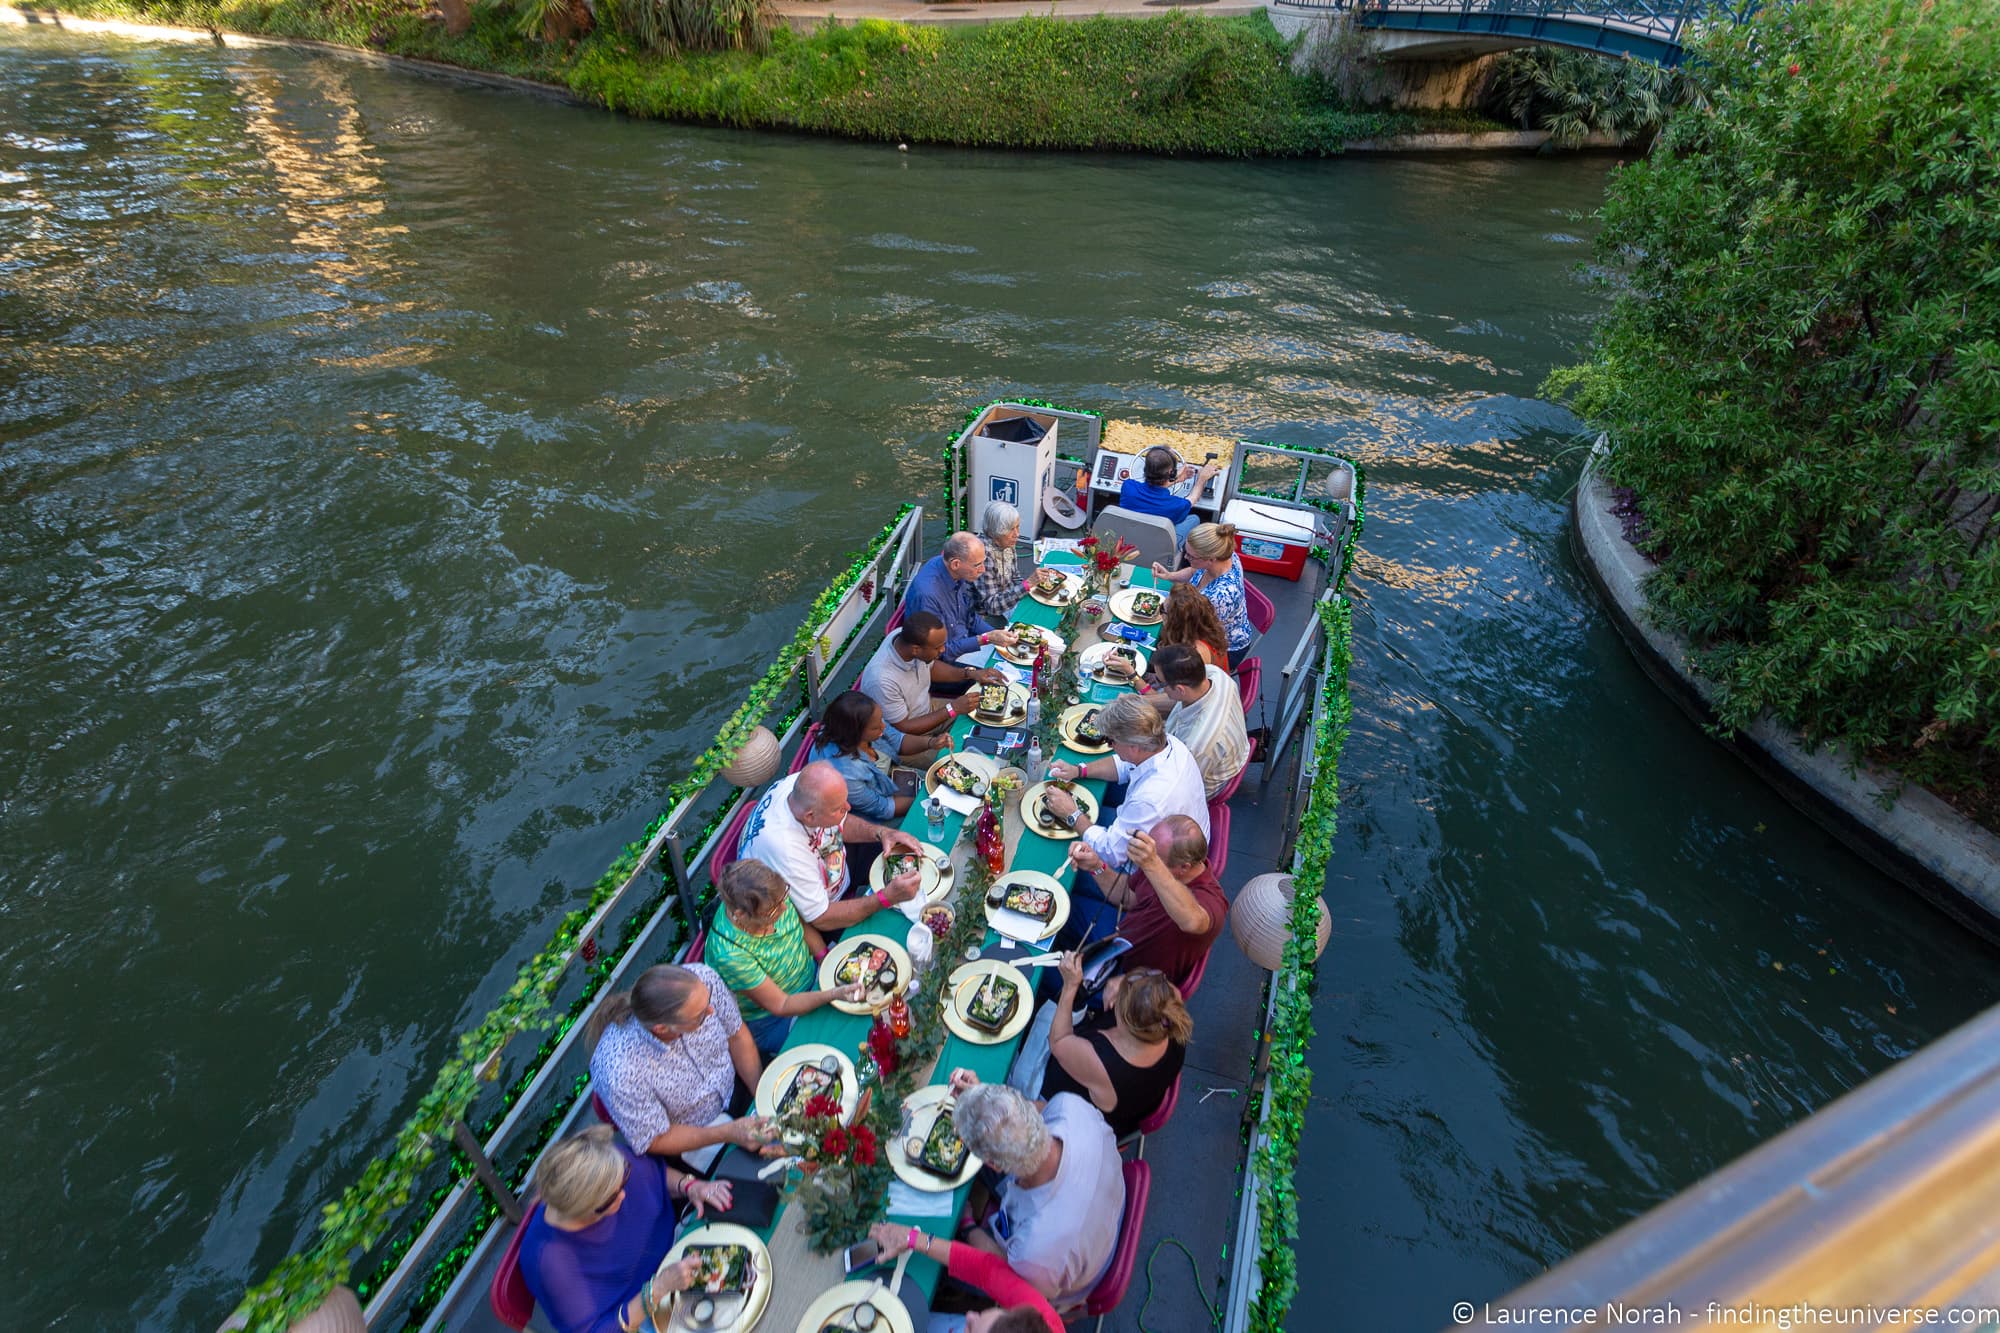 SAN ANTONIO RIVER WALK: All You Need to Know BEFORE You Go (with